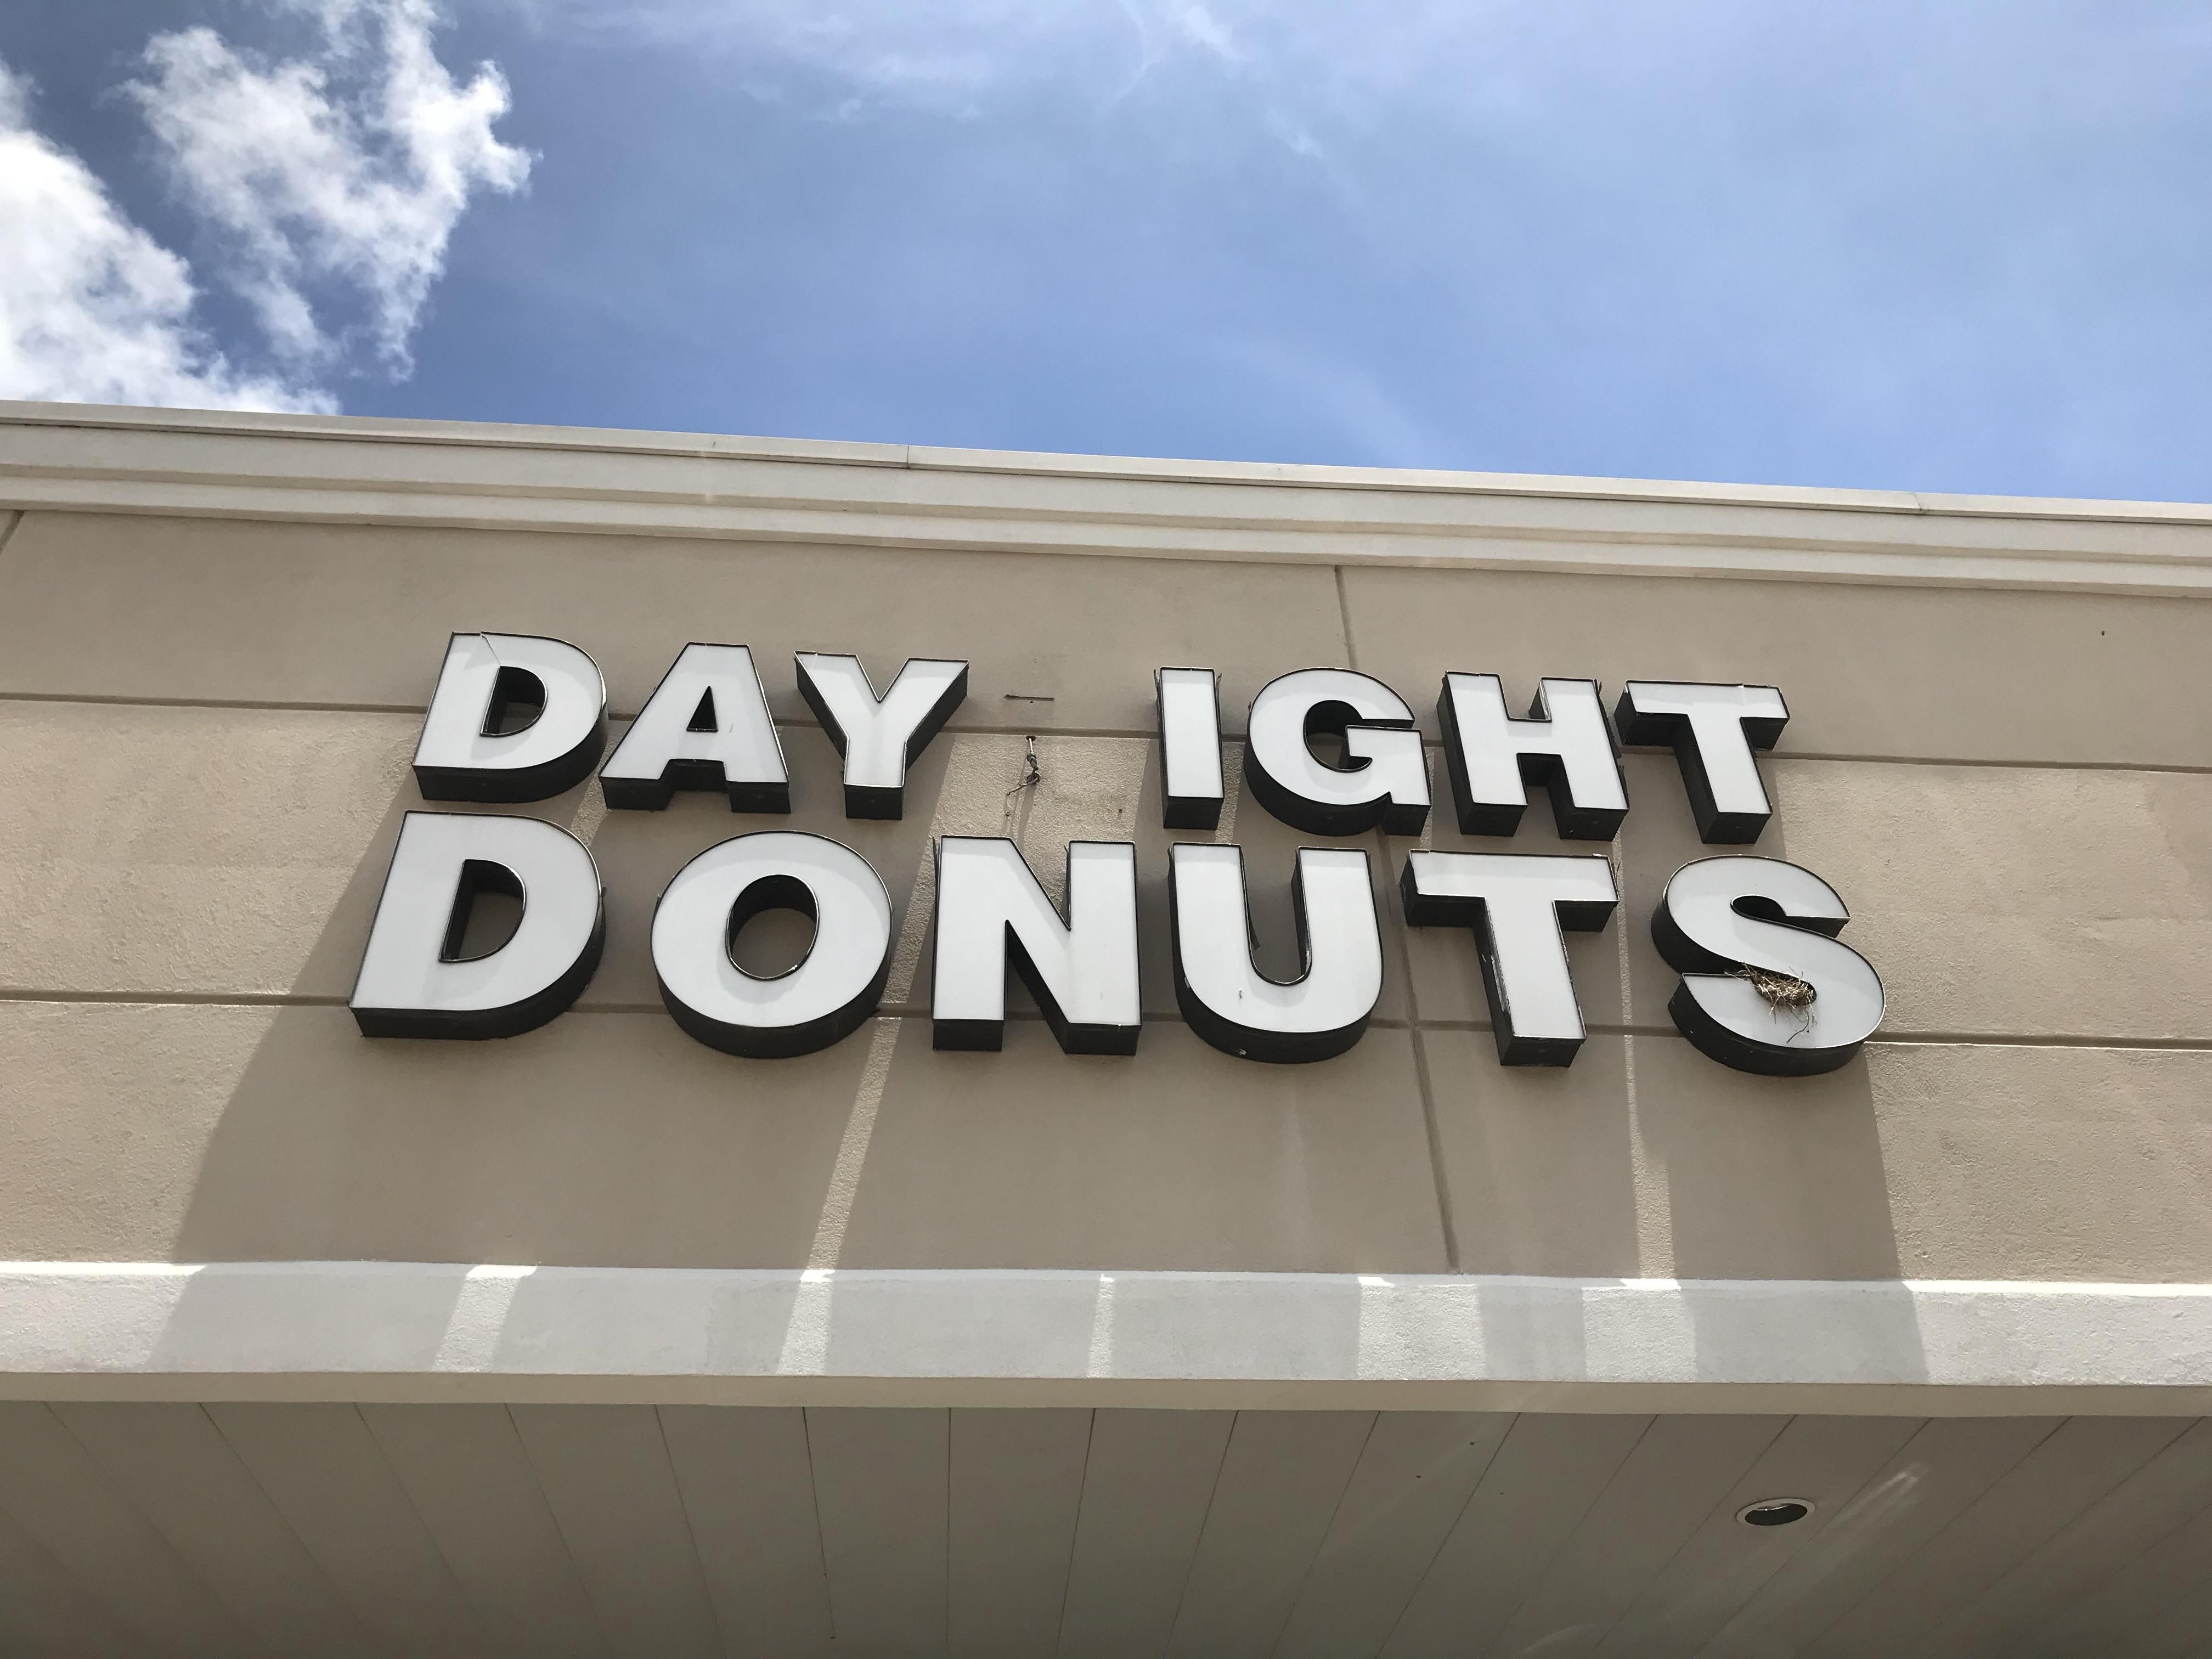 I was wondering if their donuts were any good...Sign says it all.